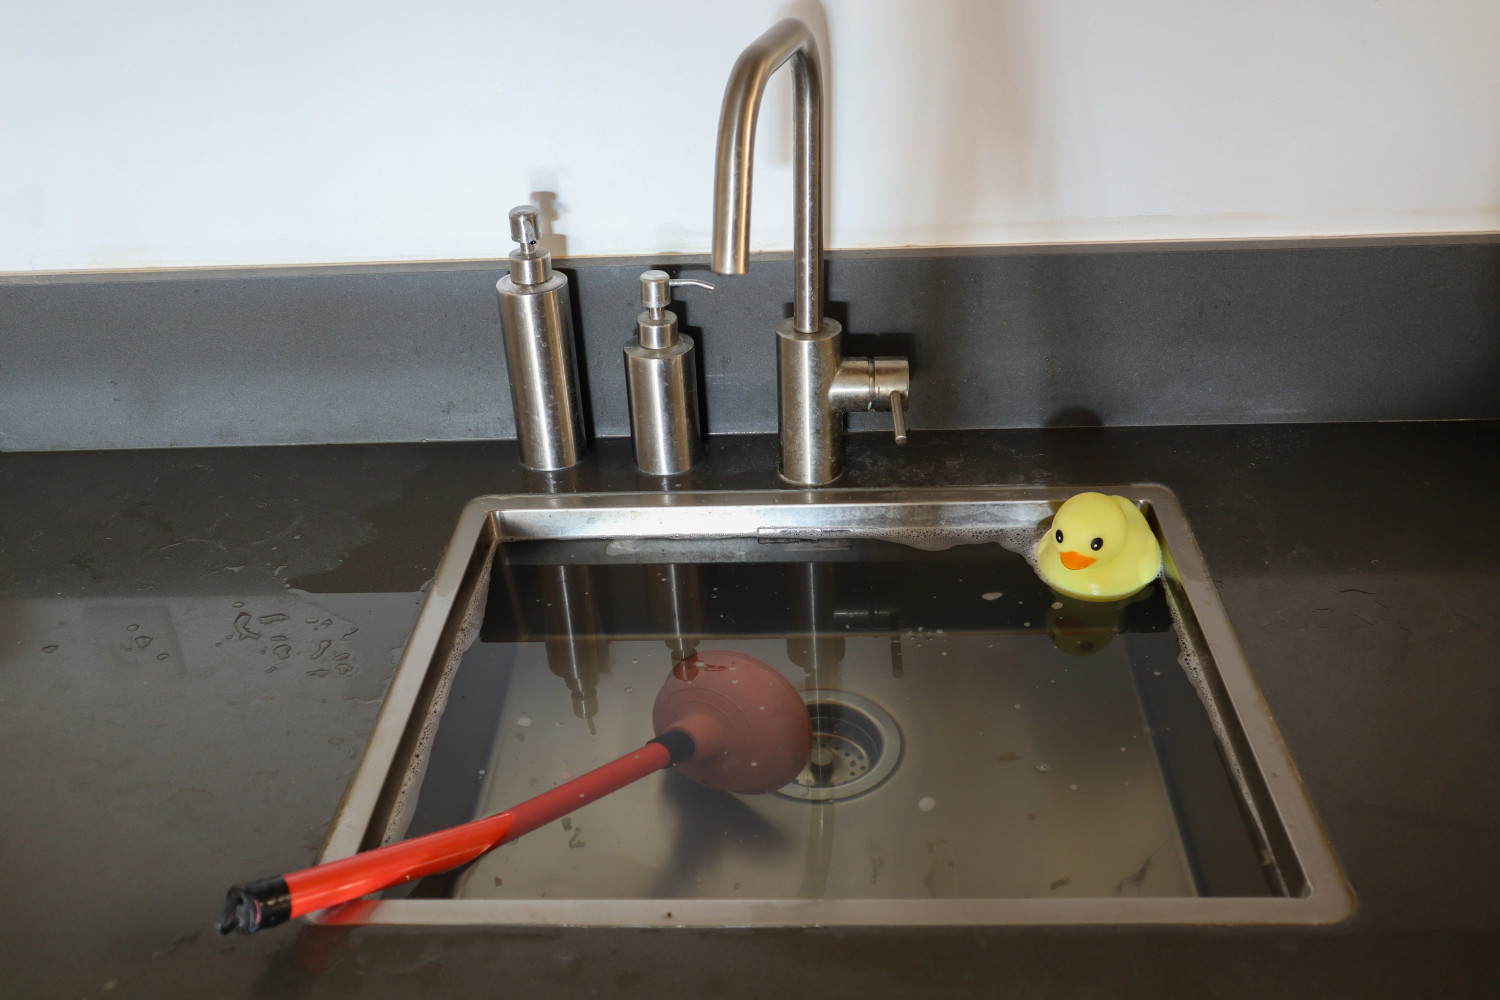 Kitchen Sink Problems: How to Fix Common Issues